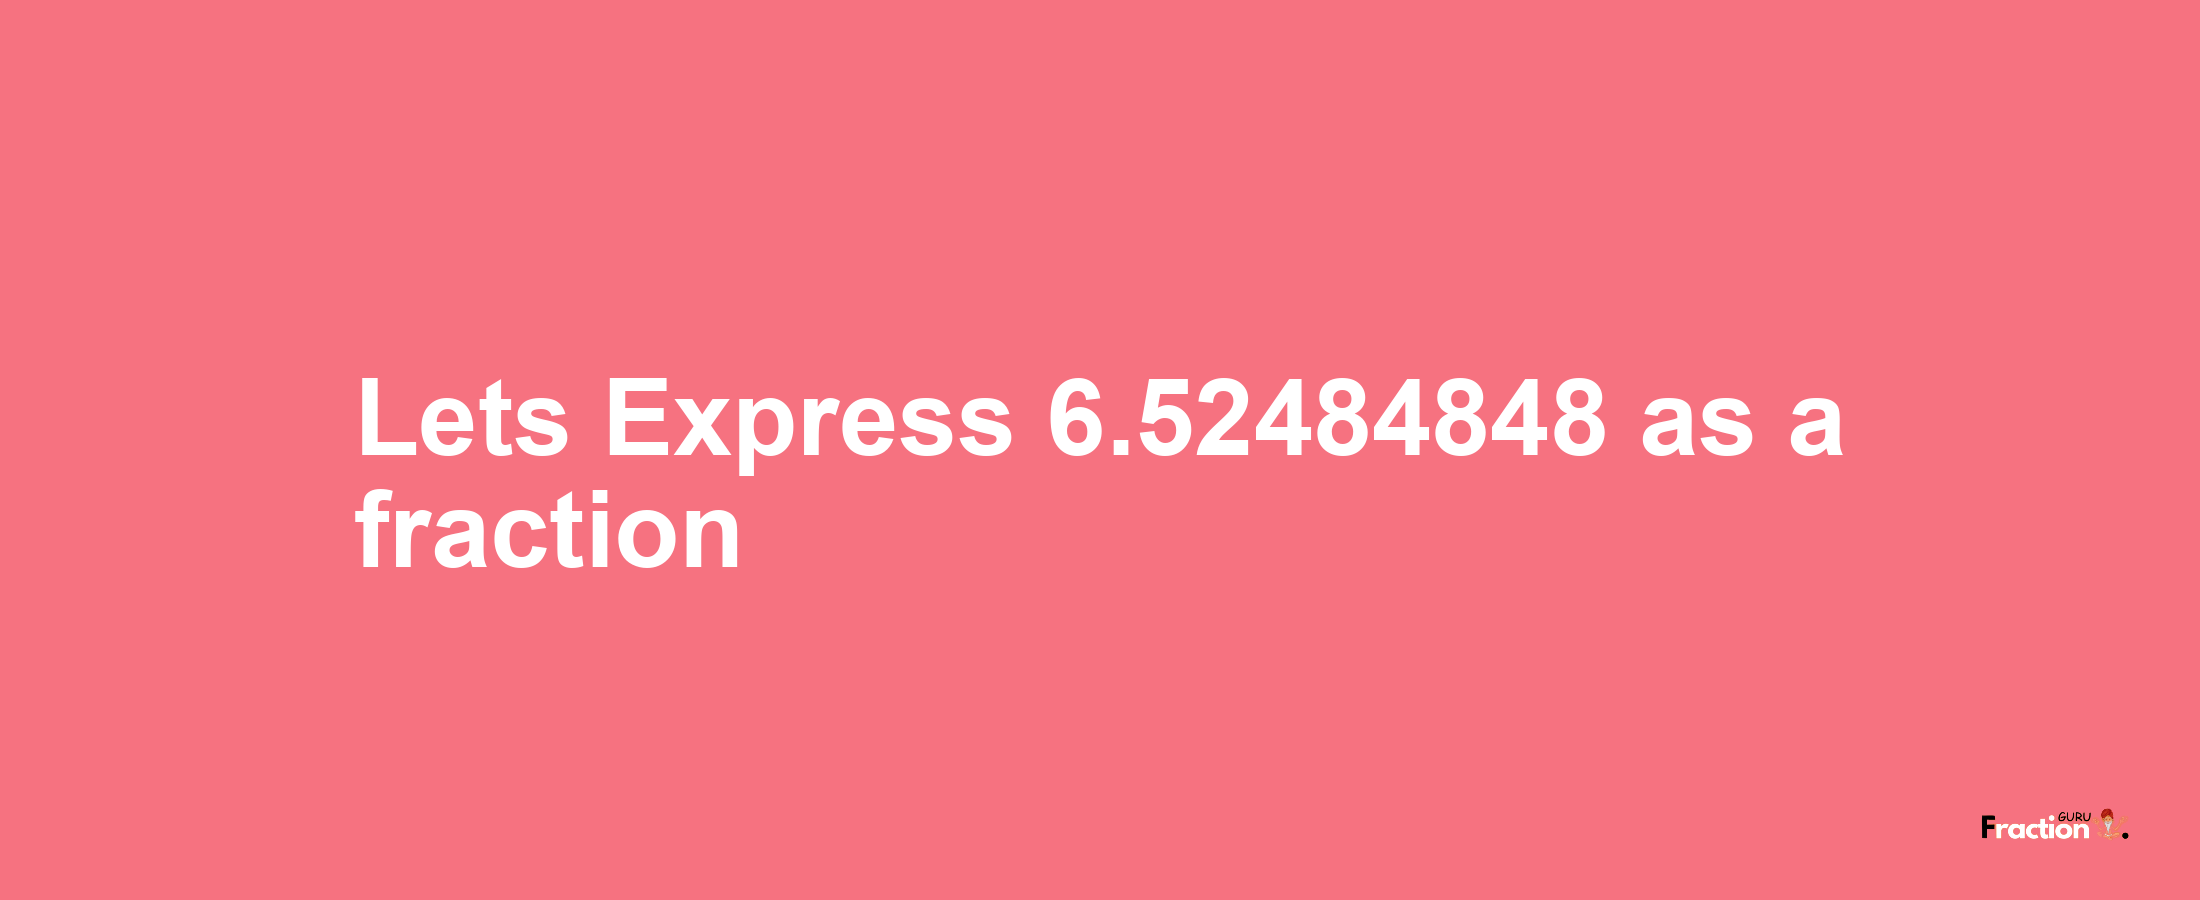 Lets Express 6.52484848 as afraction